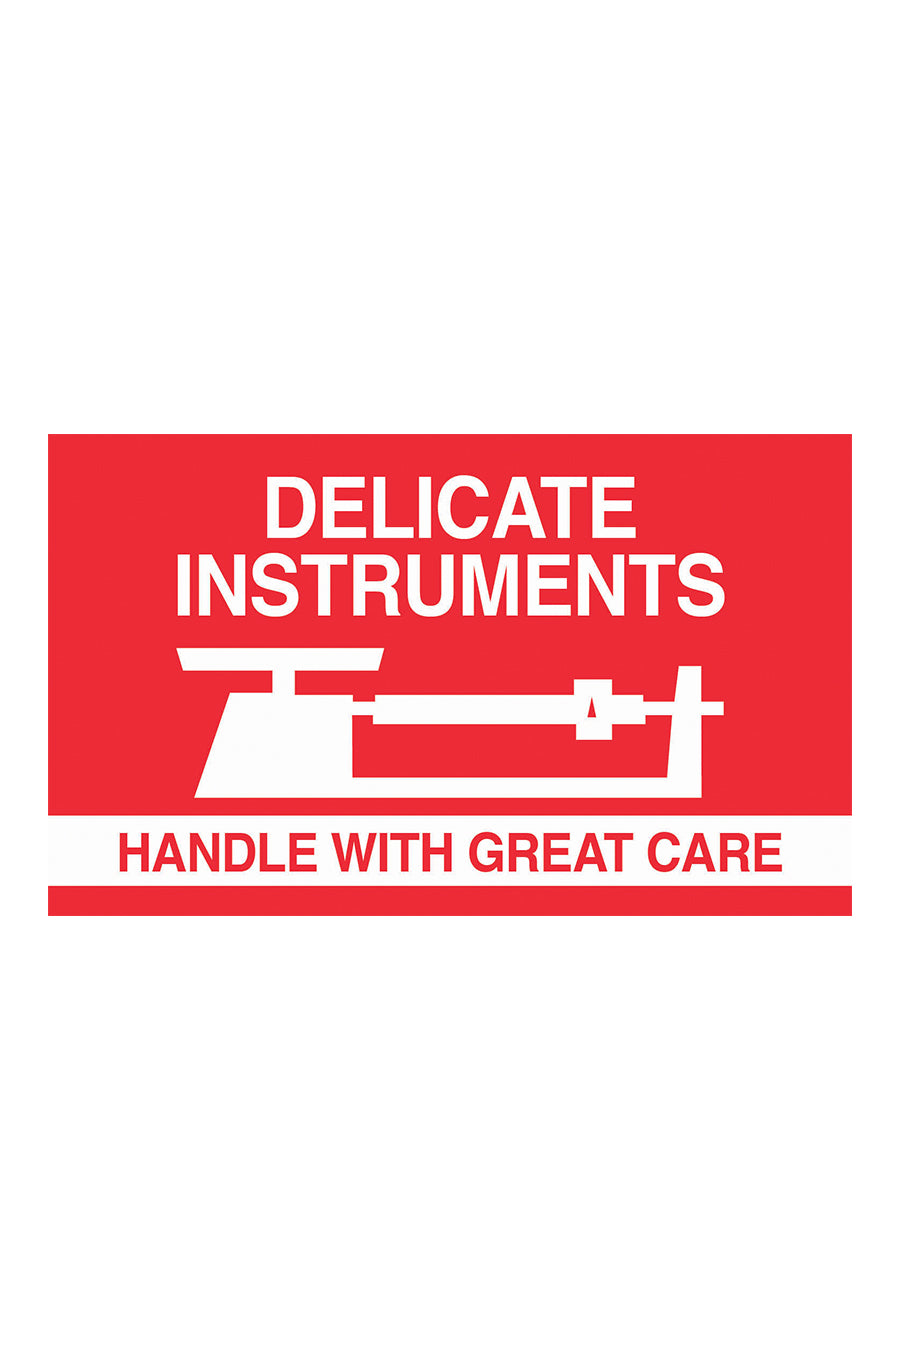 "Delicate Instruments - Handle With Great Care", 3" x 5", Red/White, 500 Labels/Roll